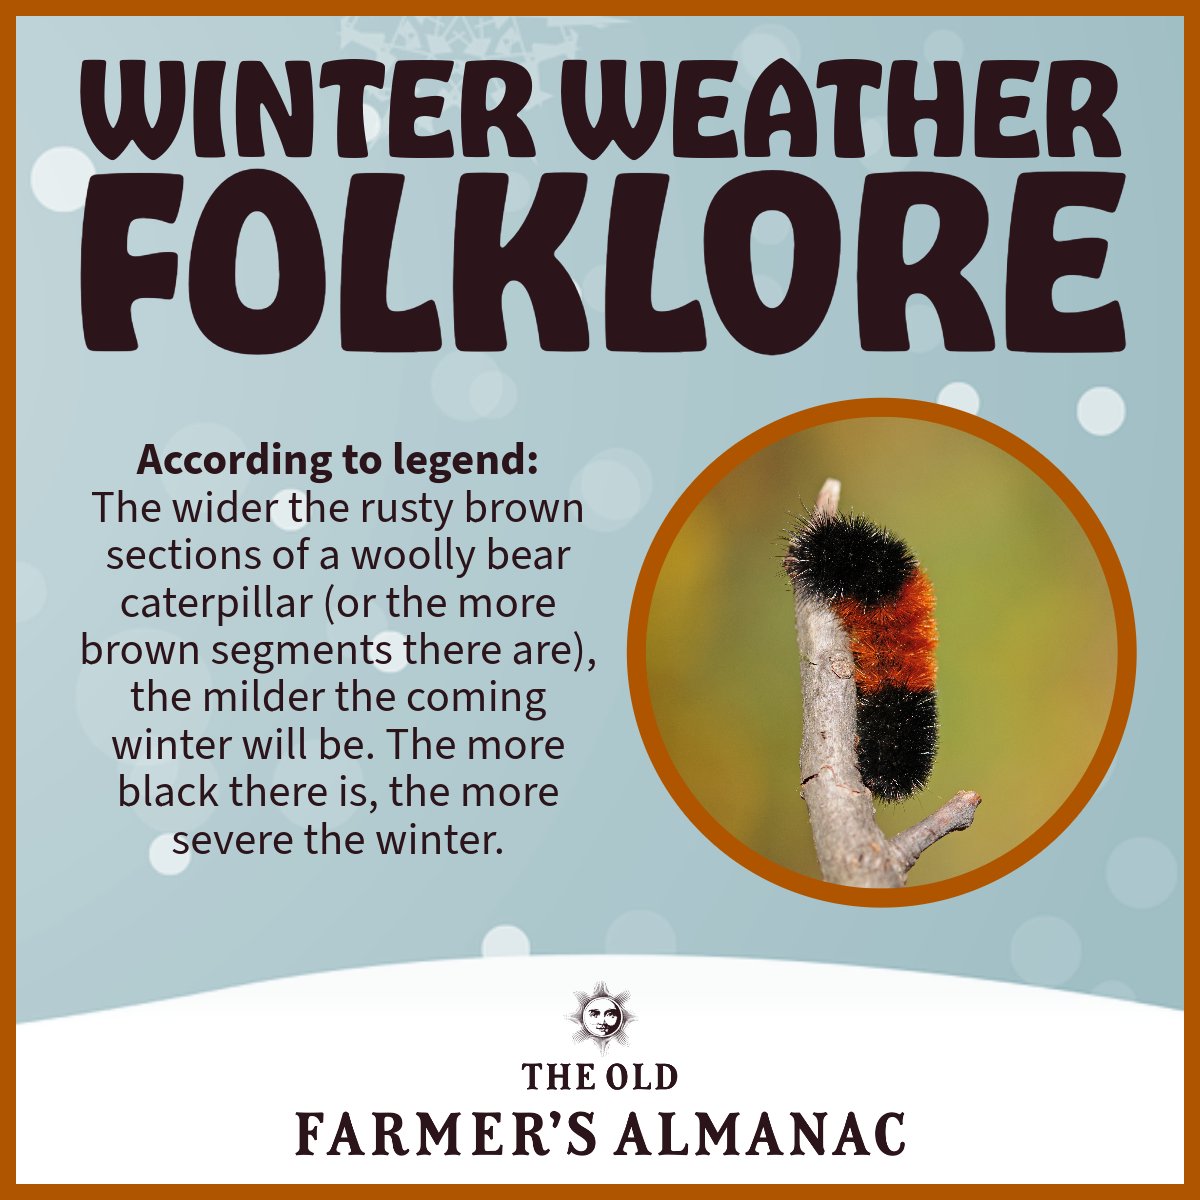 winter weather folklore, using a woolly bear caterpillar to predict winter. According to legend:  The wider the rusty brown sections (or, the more brown segments there are), the milder the coming winter will be. The more black there is, the more severe the winter. 